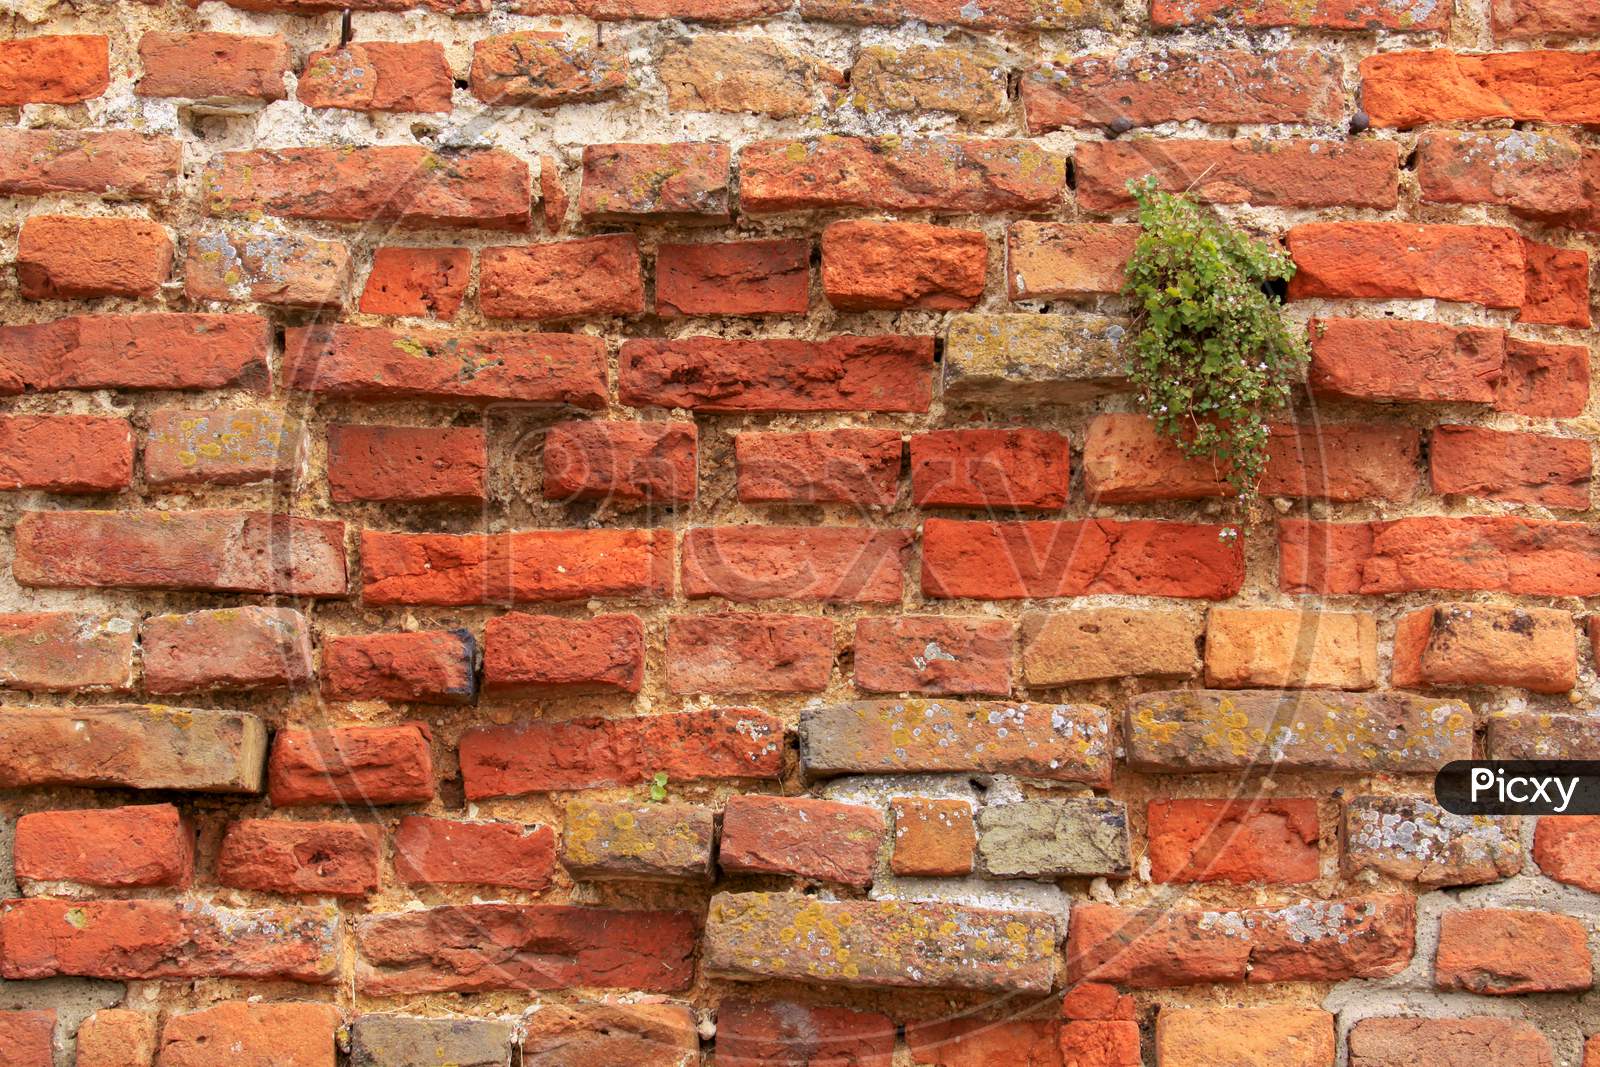 Red Brick Wall With Green Plant Growing In A Crack